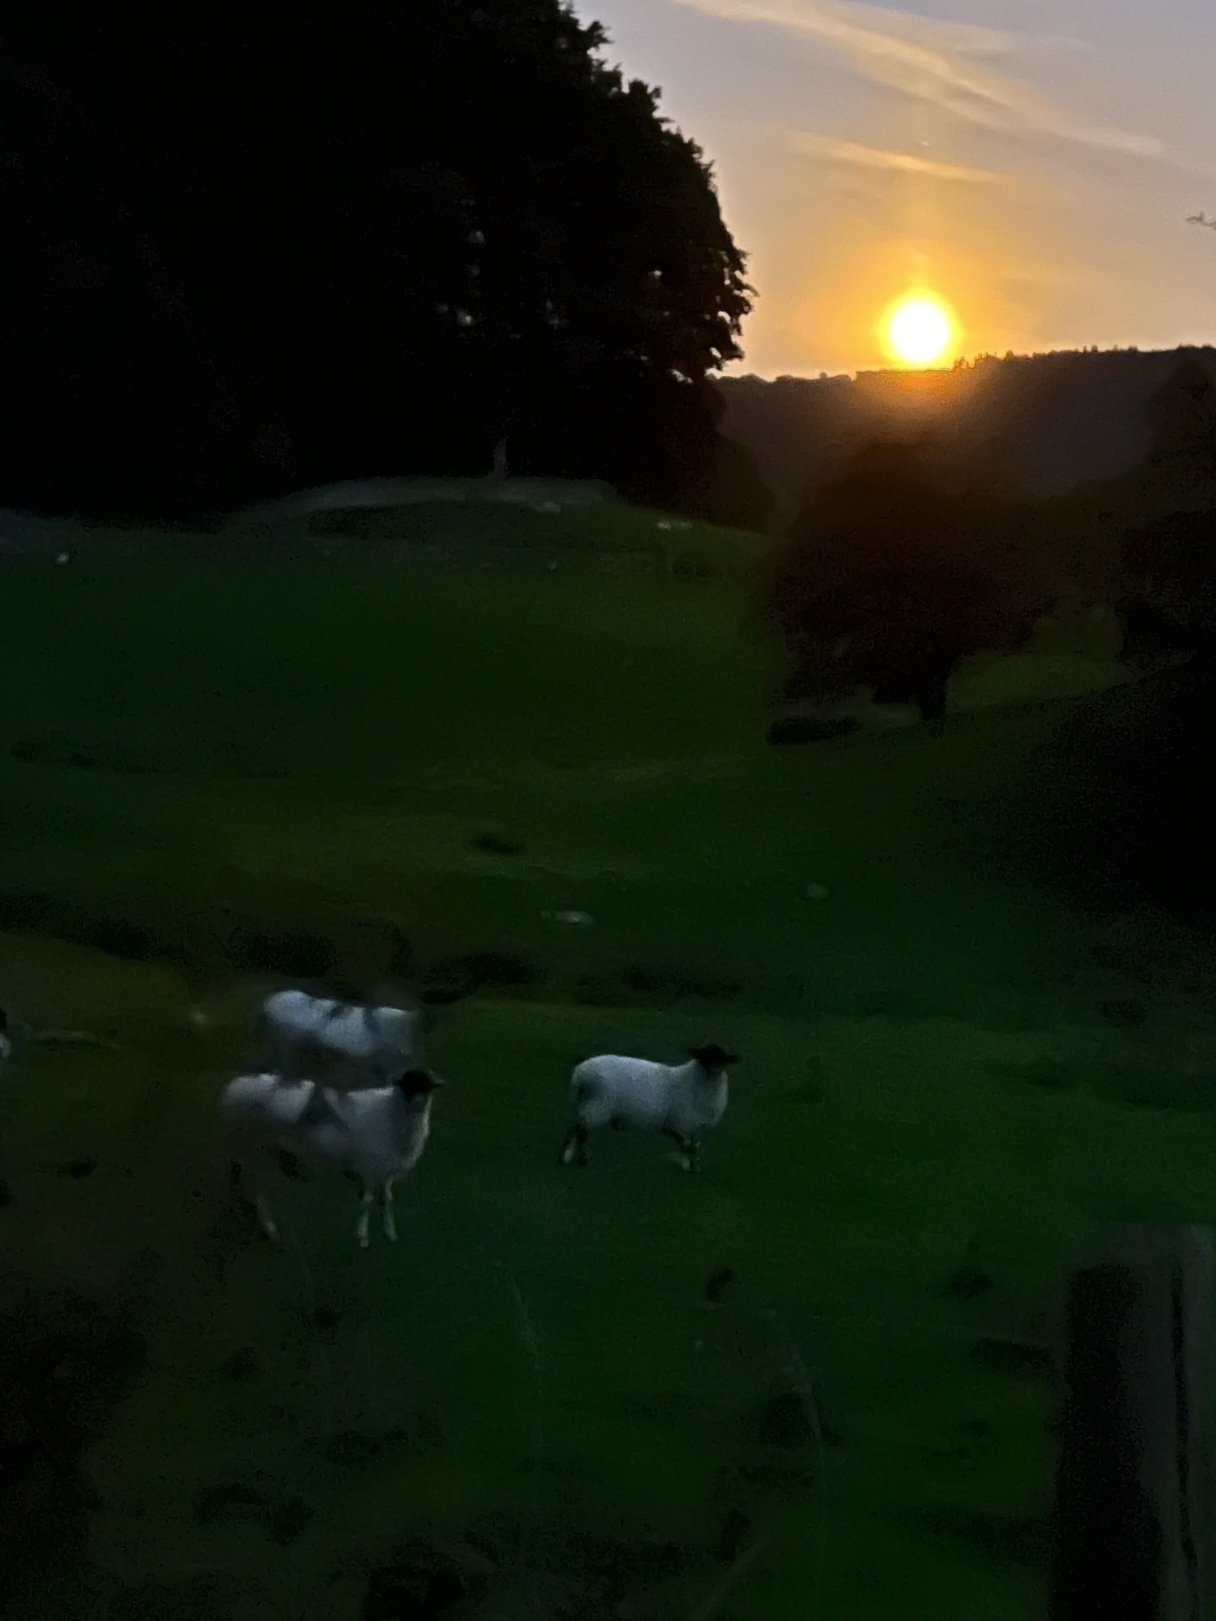 Moon shot with sheep in foreground 